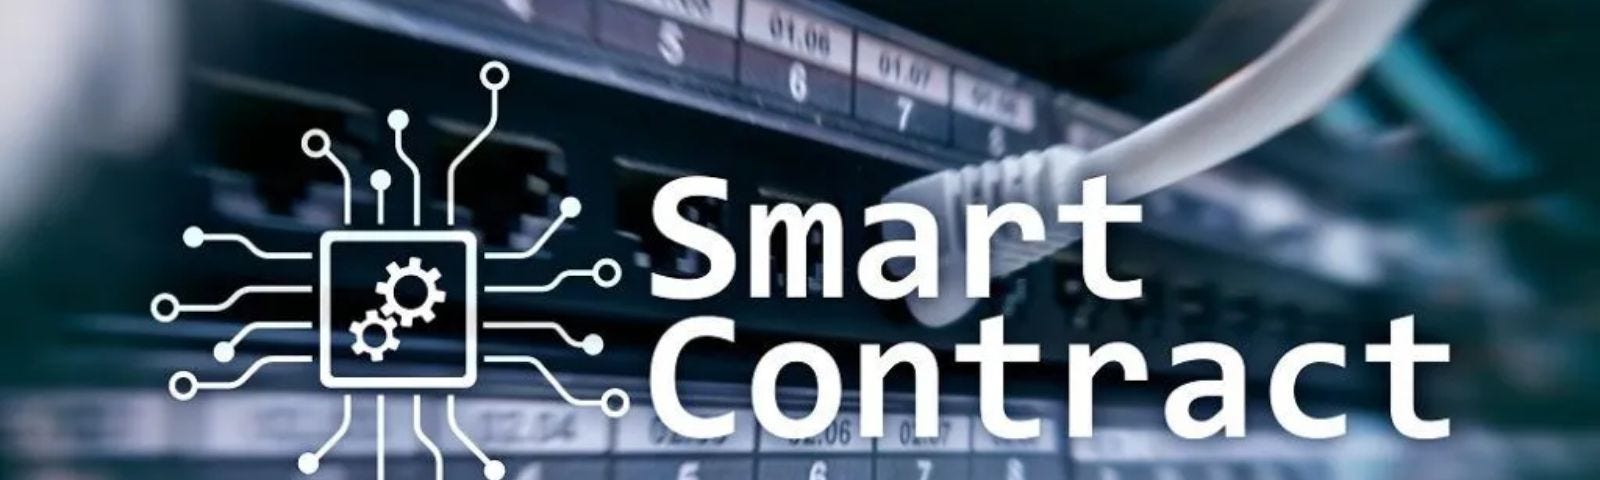 Smart Contract Audit Services